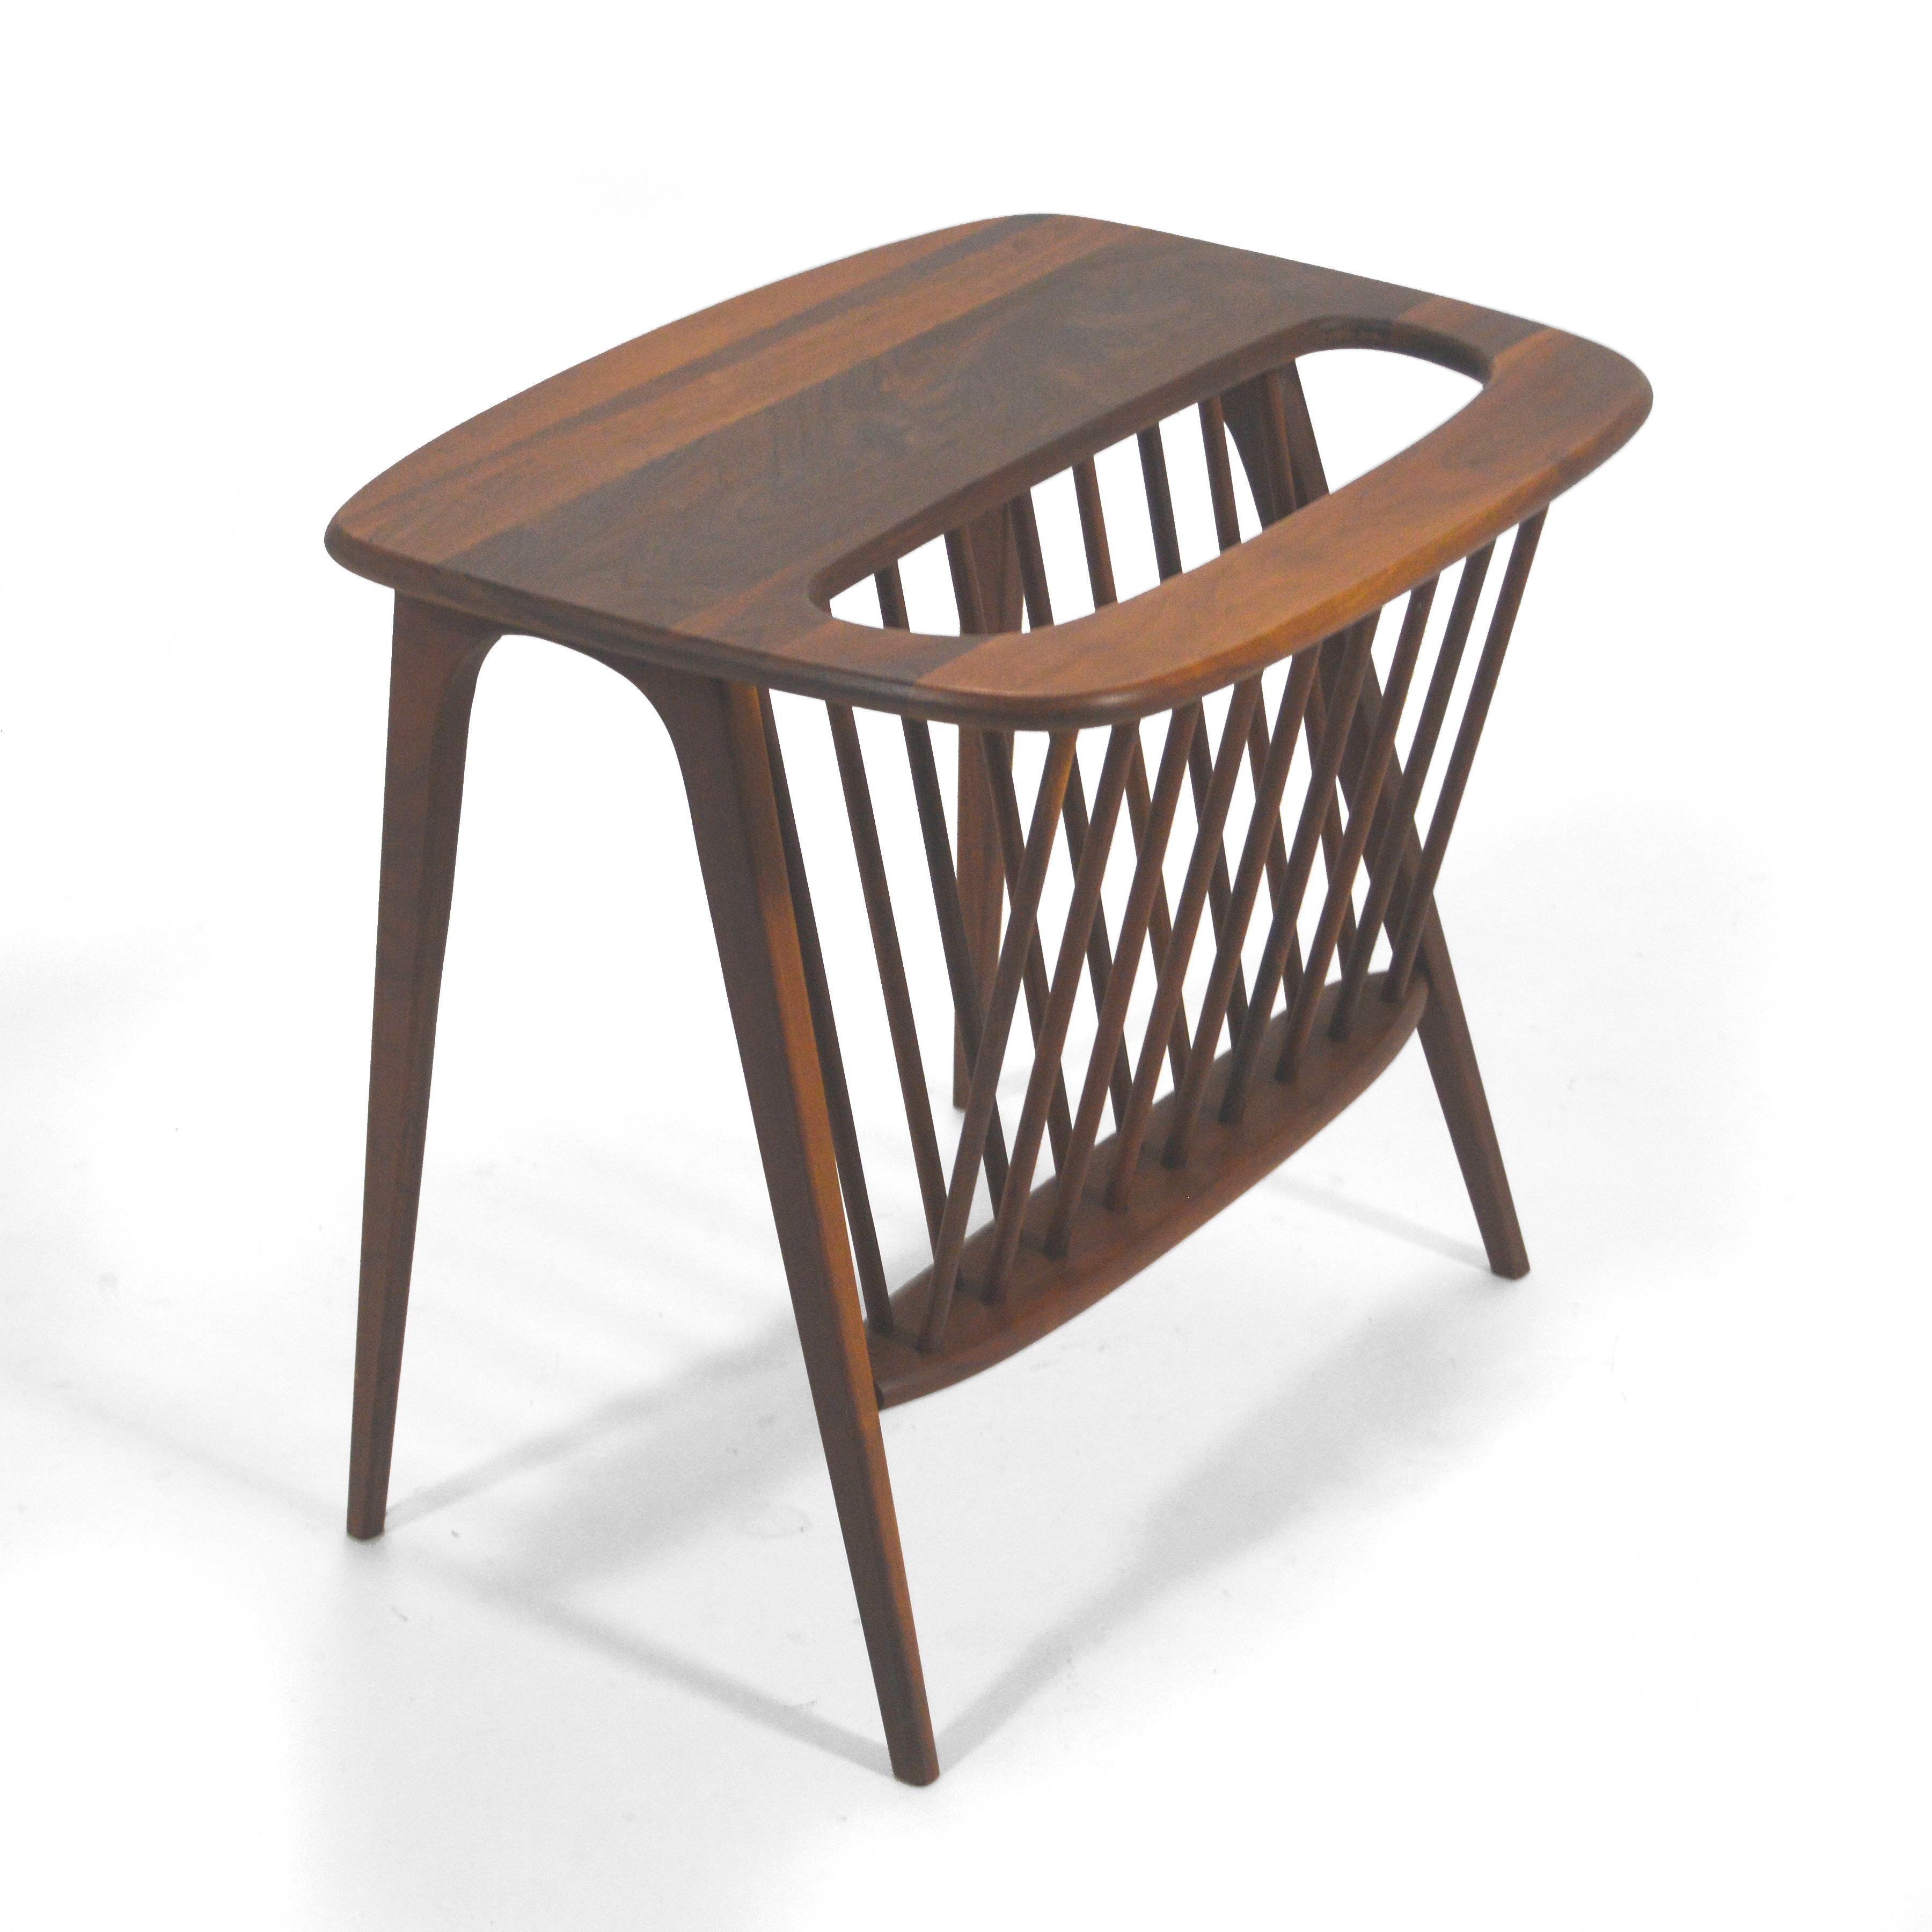 A beautiful design that is also very practical, Umanoff’s design is a side or end table with an integrated magazine rack. Crafted of rich walnut, the sculptural form has a visual lightness that is a hallmark of midcentury design.